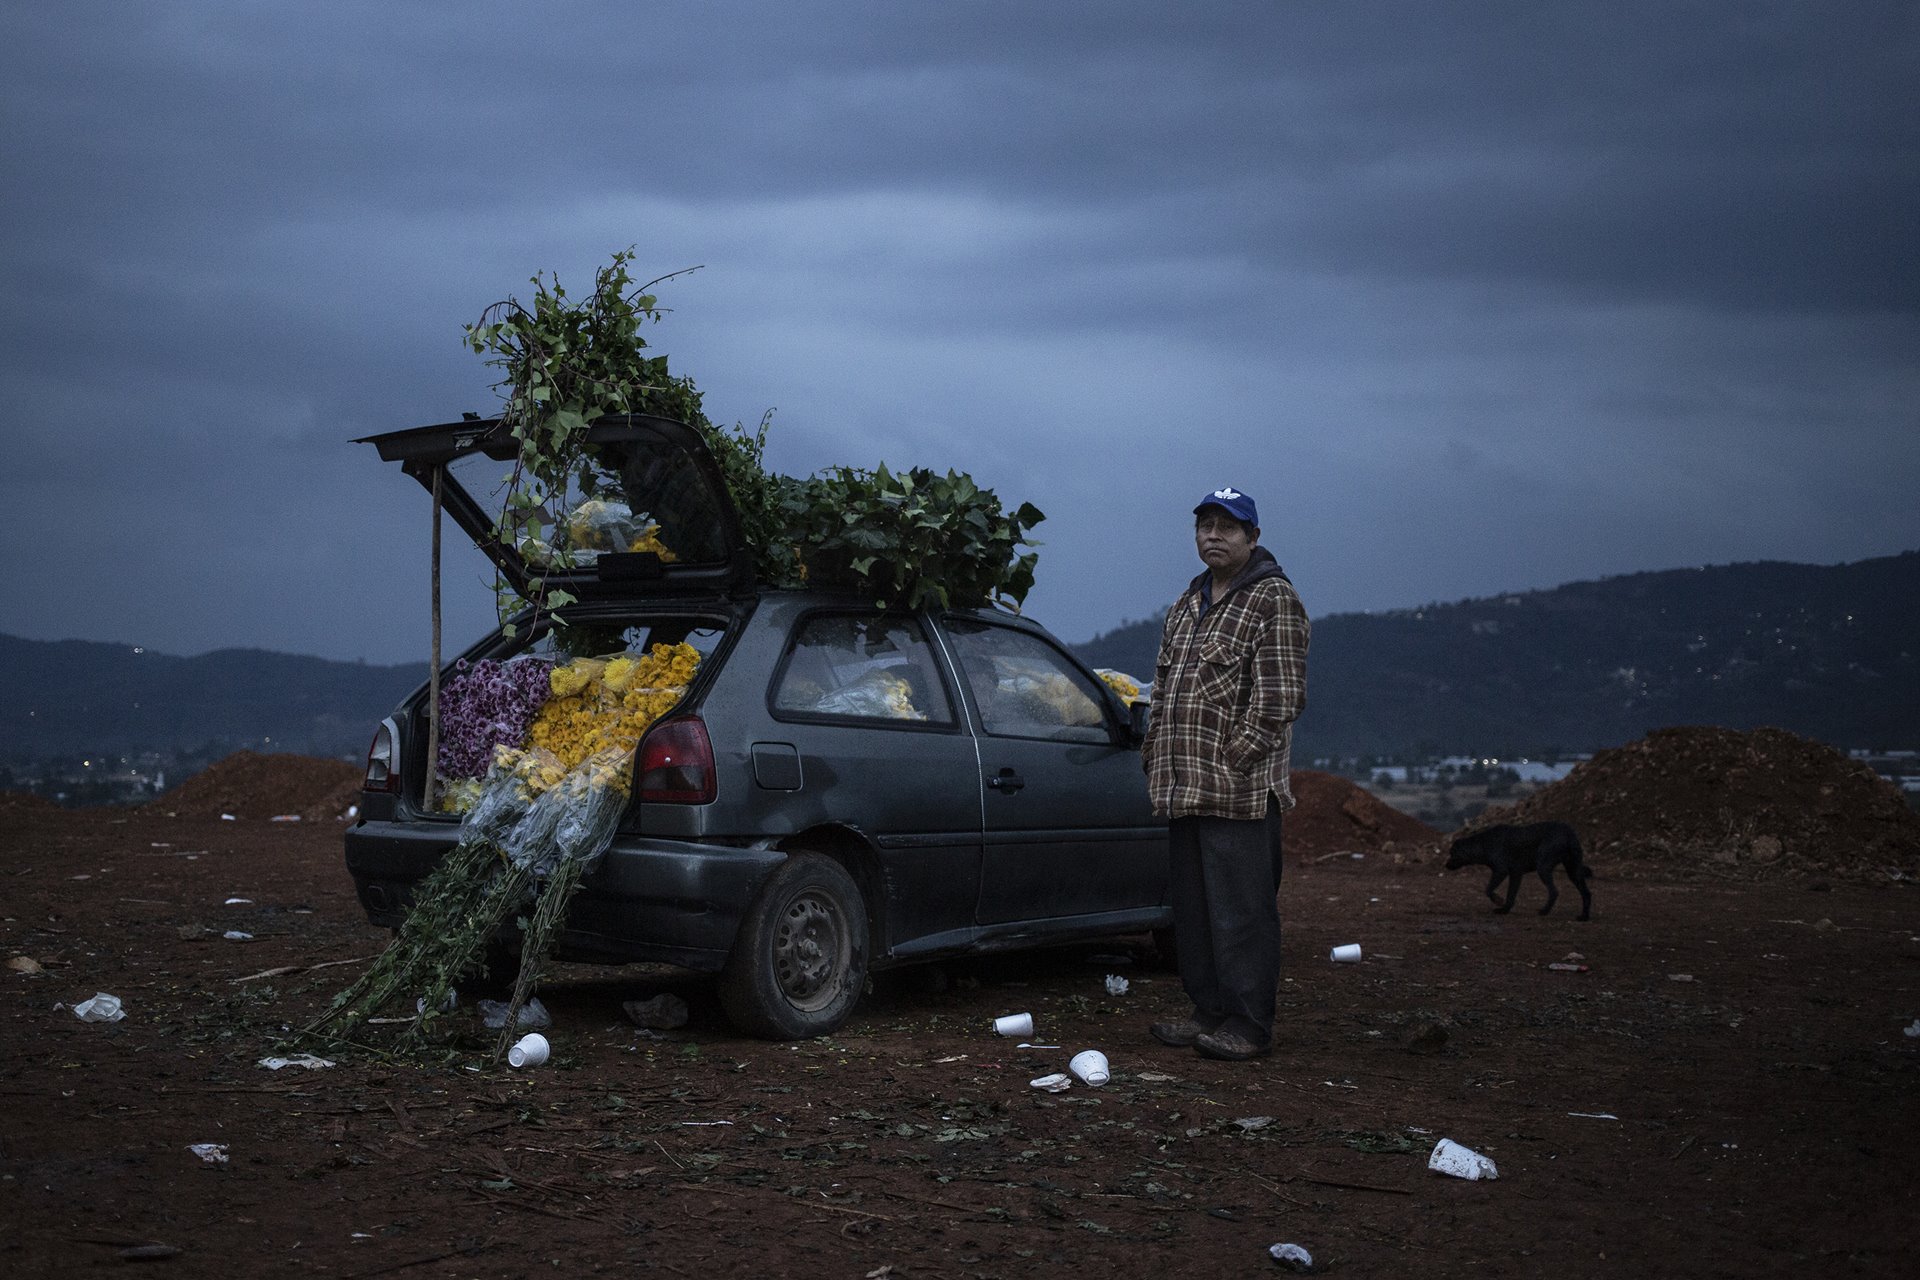 <p>A man sells flowers from his car at the Central de Abasto wholesale market (known as La Finca), in Villa Guerrero, Mexico. Most flowers sold at the market are shipped around the country or exported.</p>
